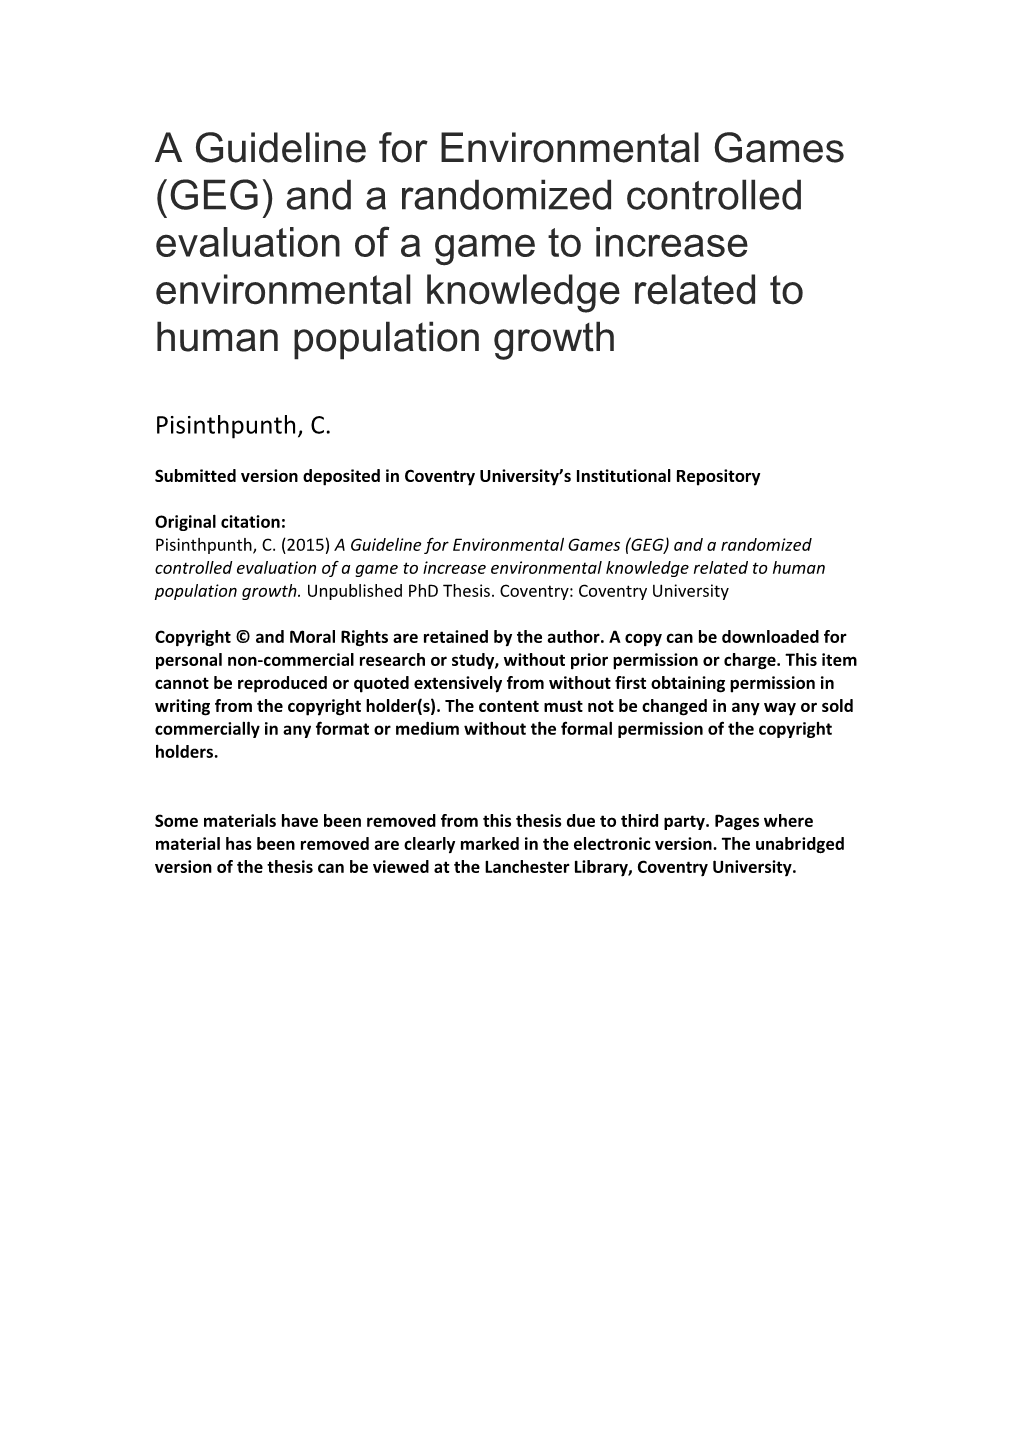 A Guideline for Environmental Games (GEG) and a Randomized Controlled Evaluation of a Game to Increase Environmental Knowledge Related to Human Population Growth